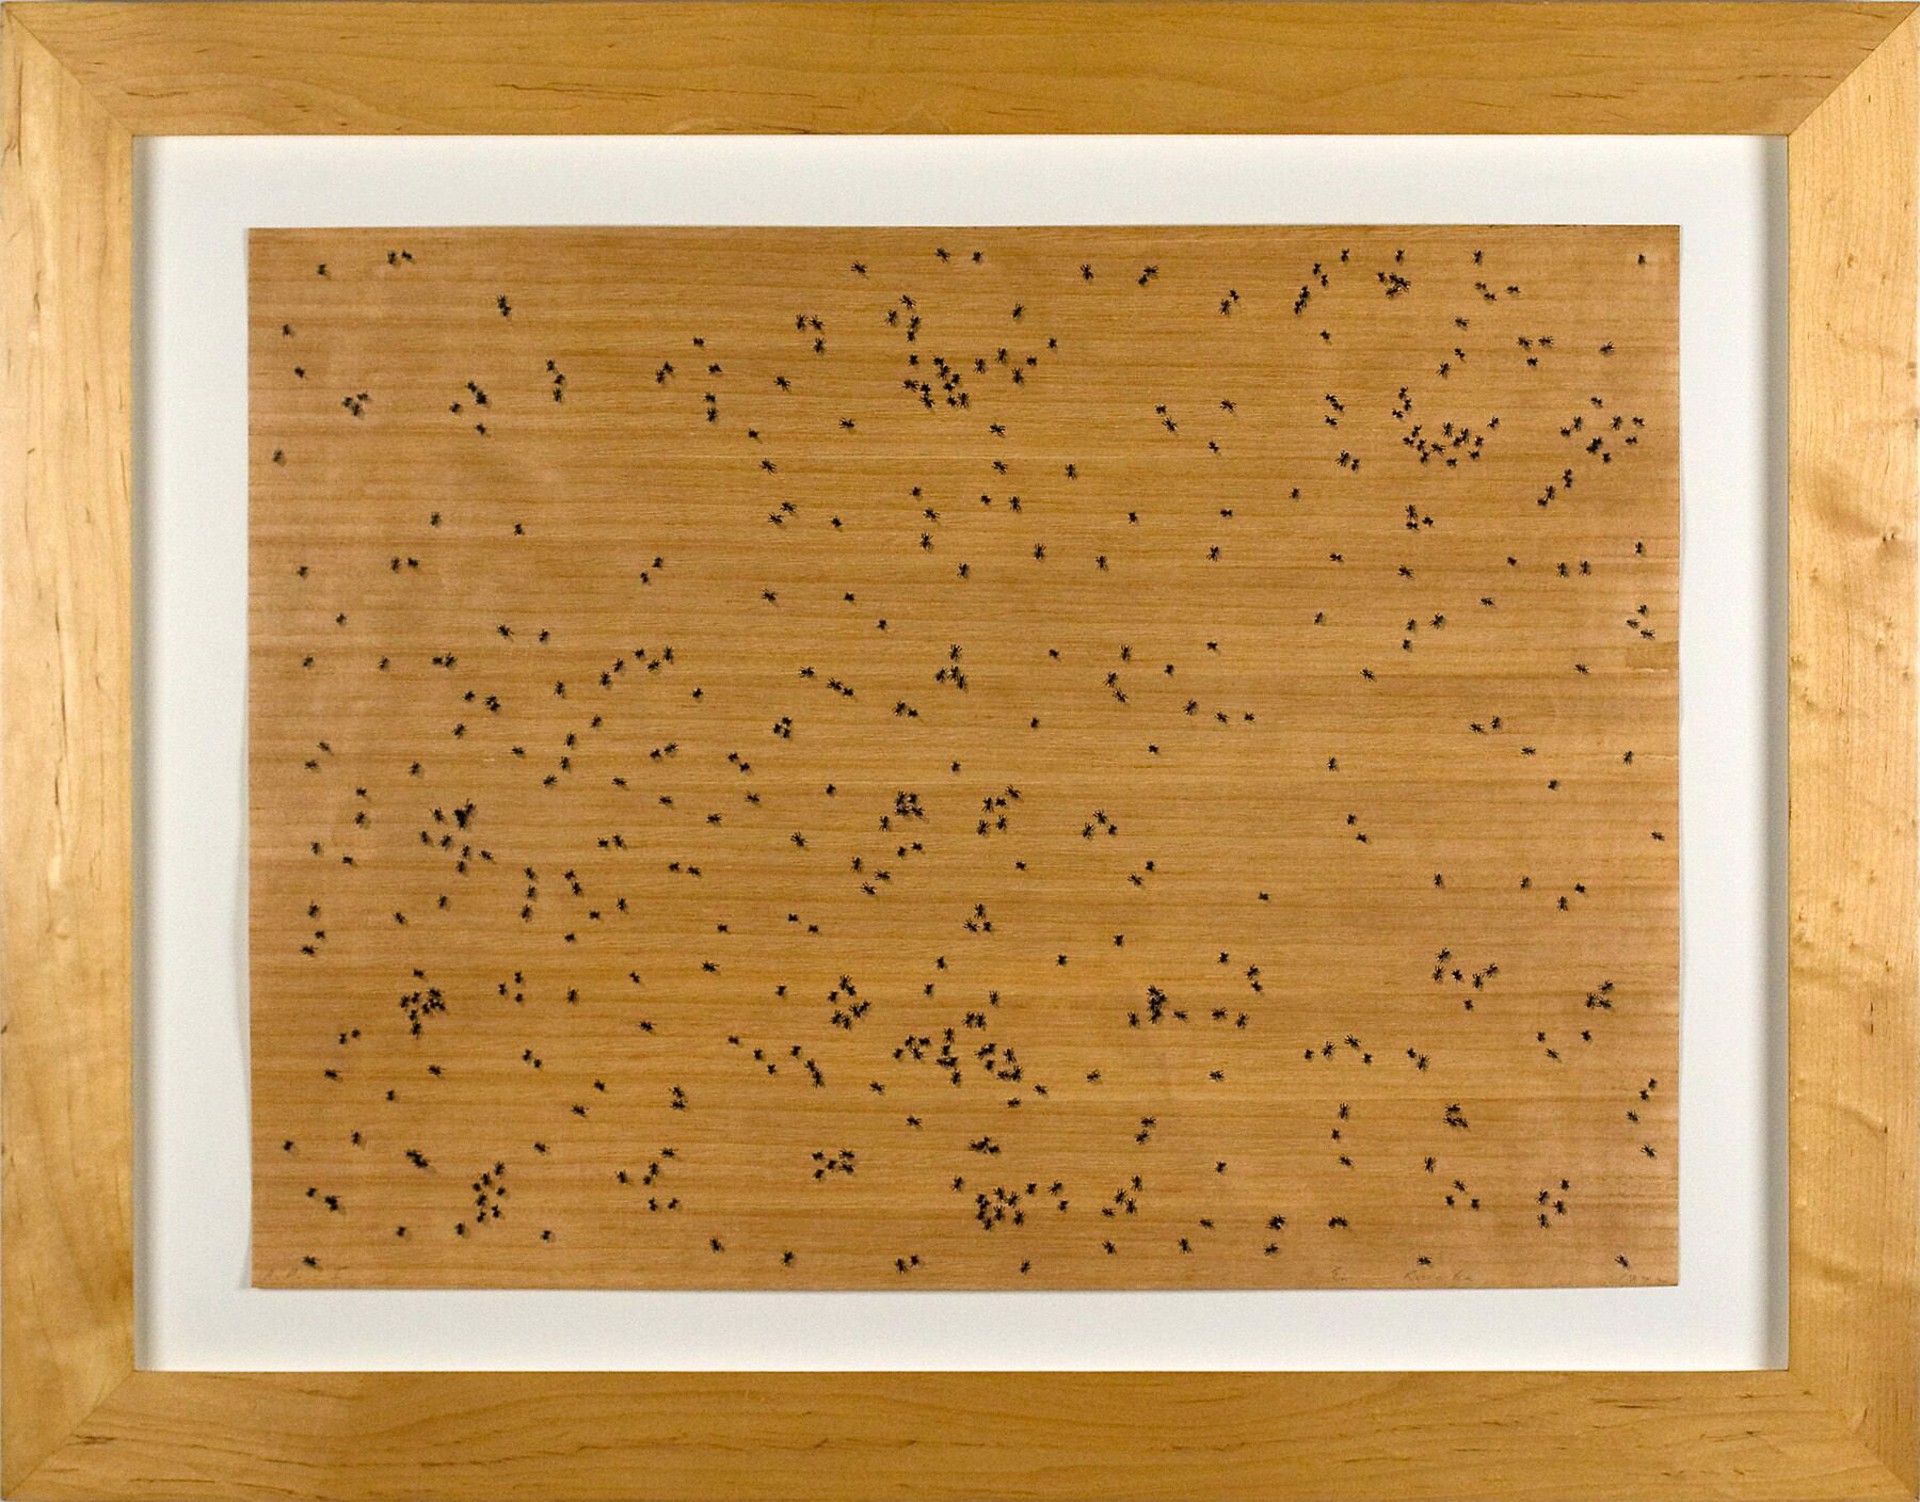 Black Ants [From Insects] by Ed Ruscha